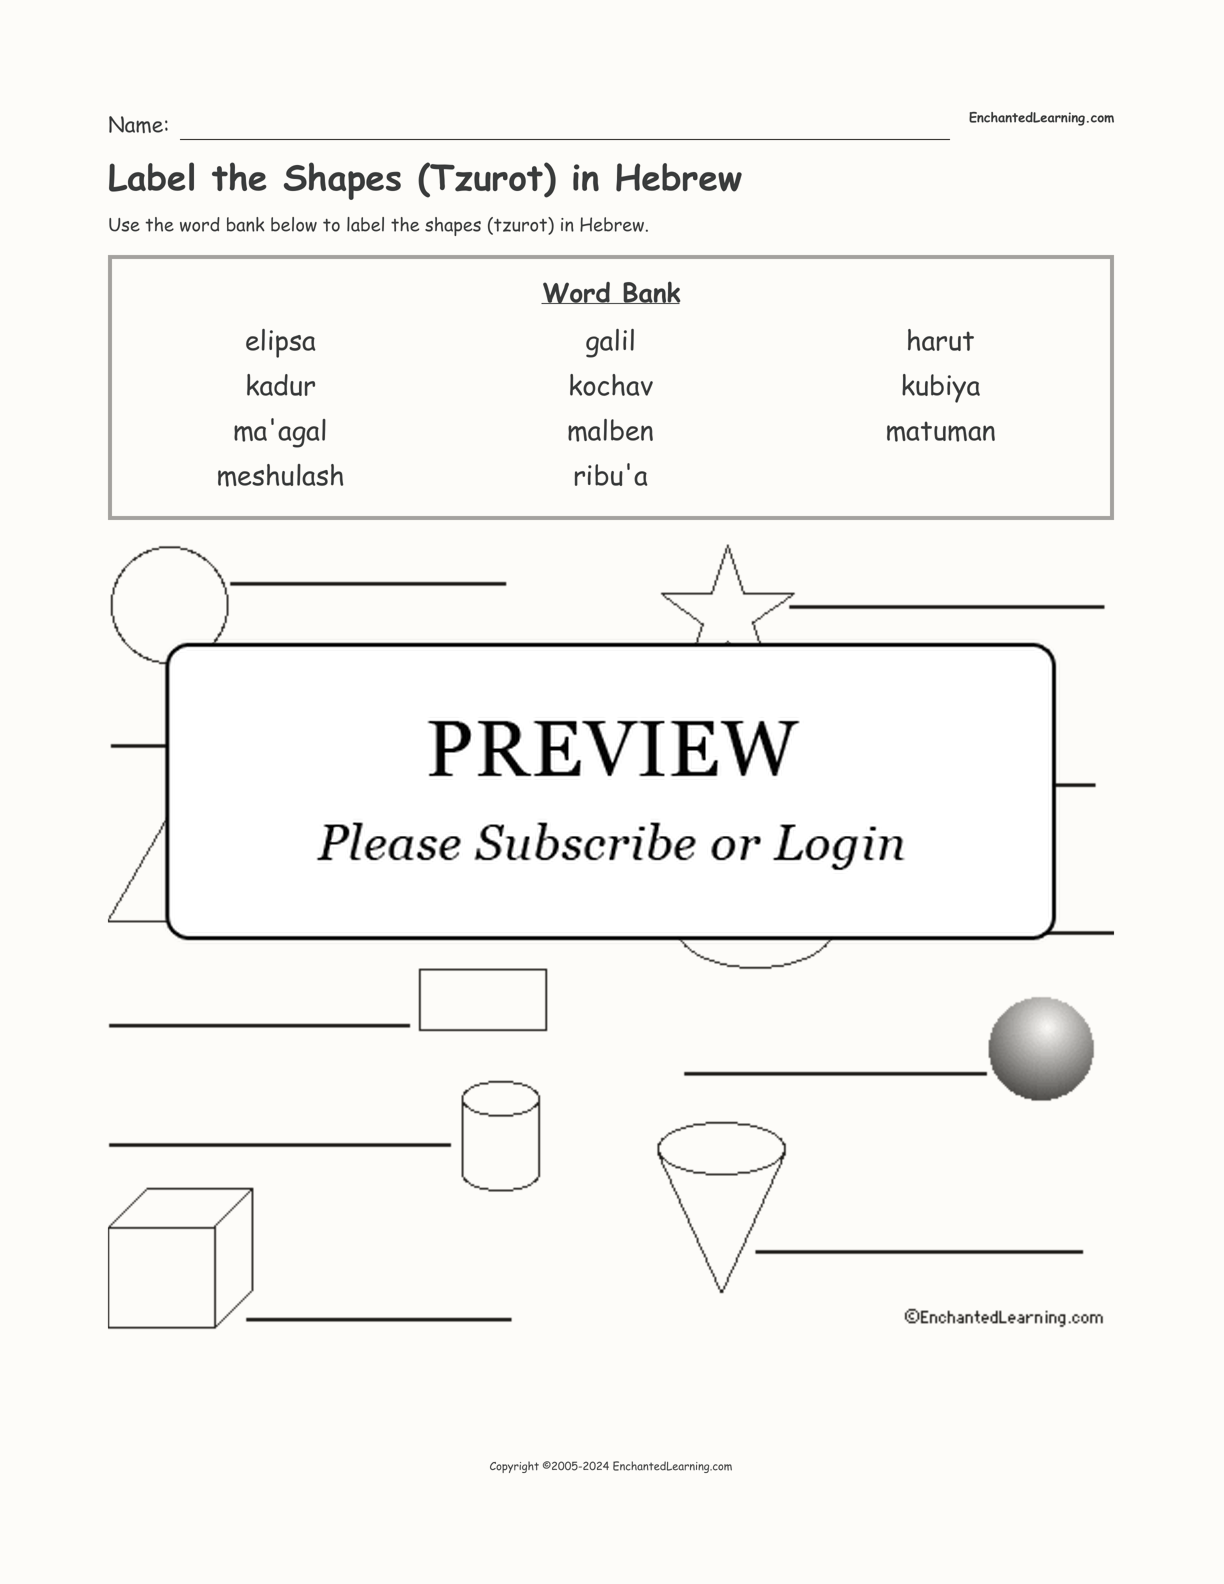 Label the Shapes (Tzurot) in Hebrew interactive worksheet page 1